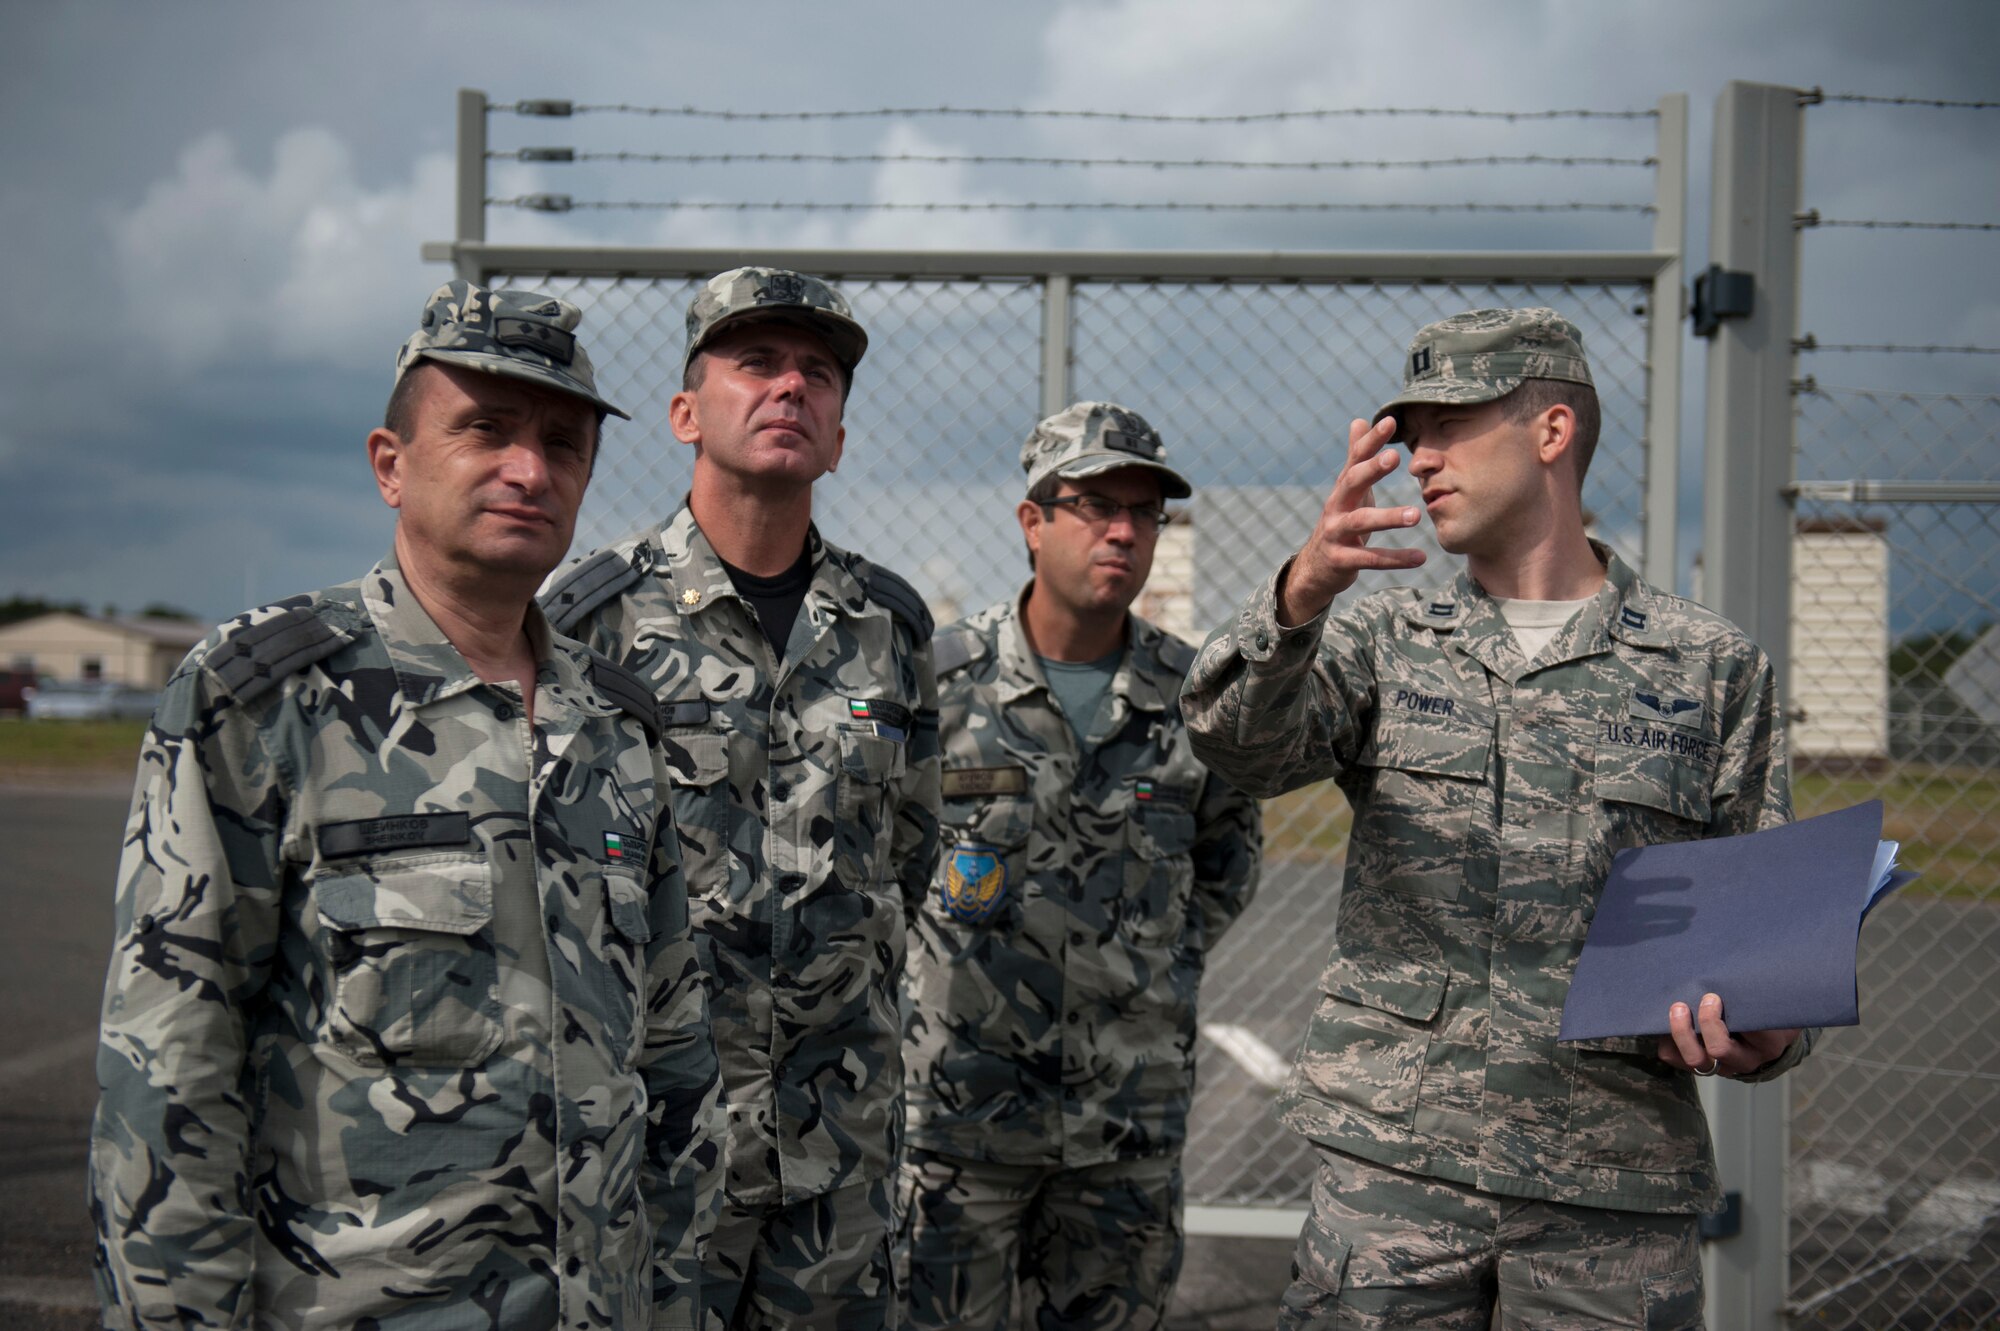 SPANGDAHLEM AIR BASE, Germany – Members of the Bulgarian air force observe 606th Air Control Squadron radar operations during a base visit Sept. 12 here.  The tour serves as a way for the United States and Bulgaria to learn and exchange ideas about each other’s air force to ensure air dominance in any contingency operation. (U.S. Air Force photo by Airman 1st Class Gustavo Castillo/Released)